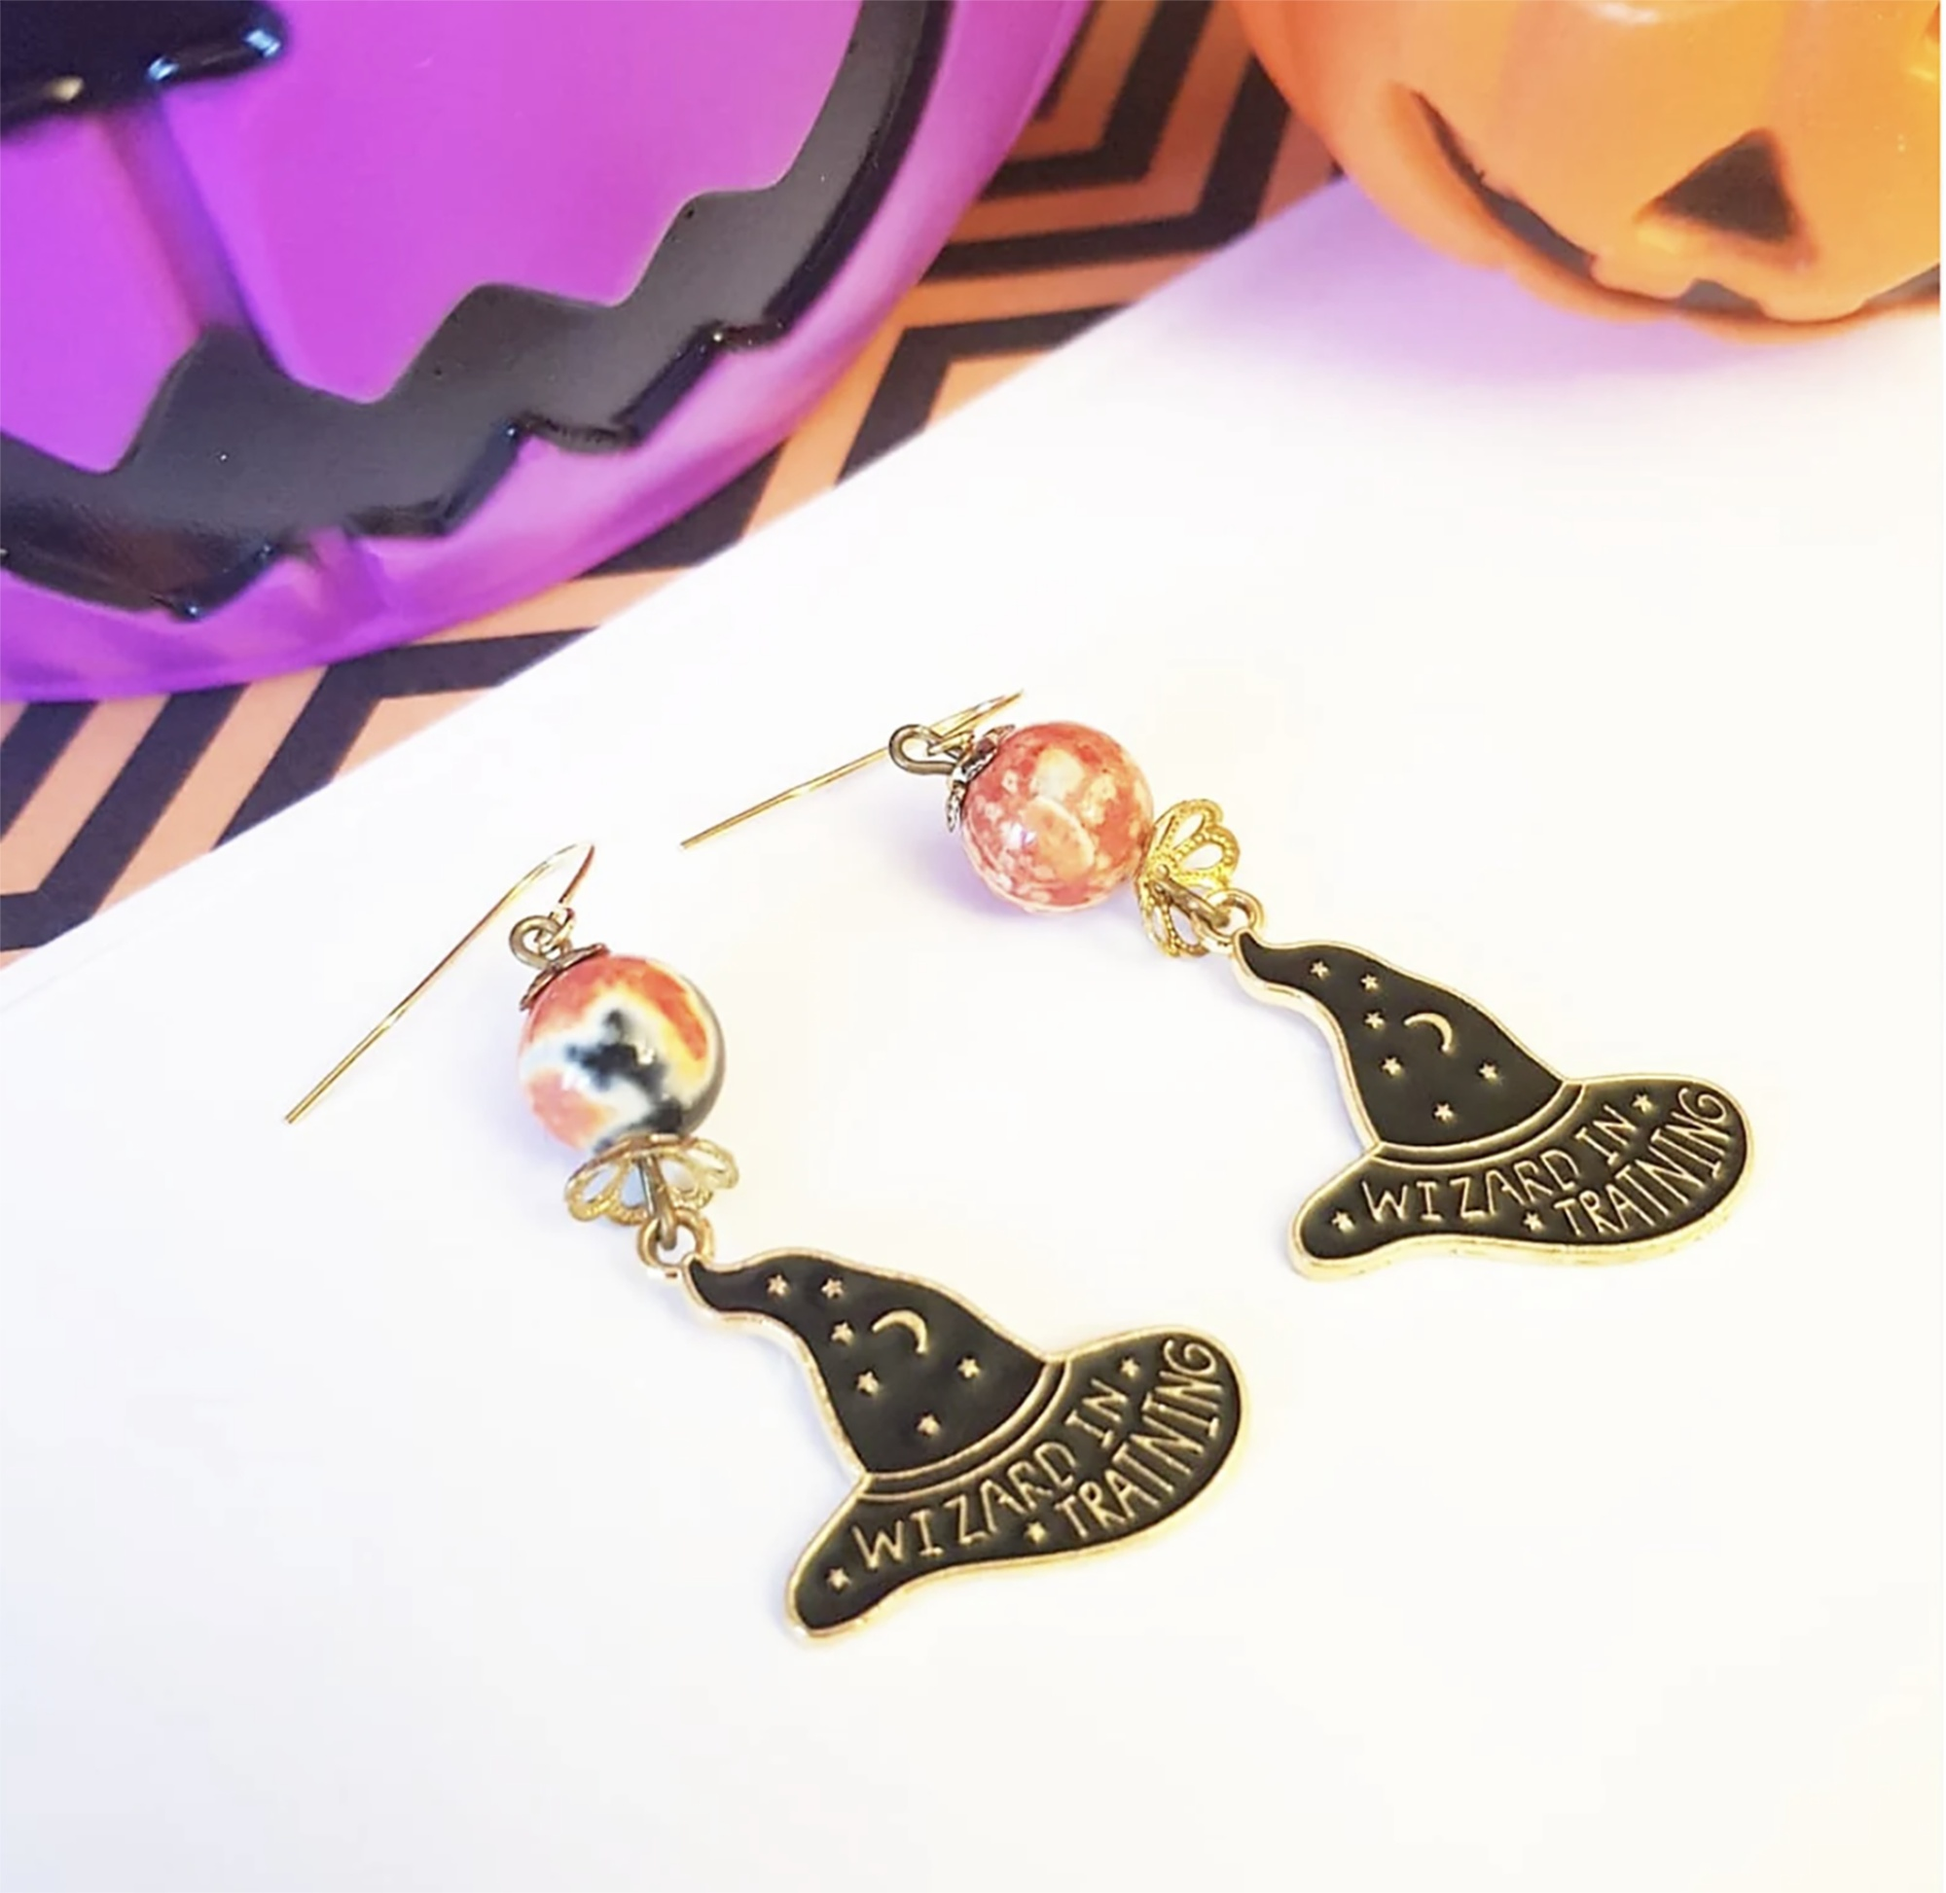 Accessorize Your Magic with These Bewitching Witch Hat Earrings